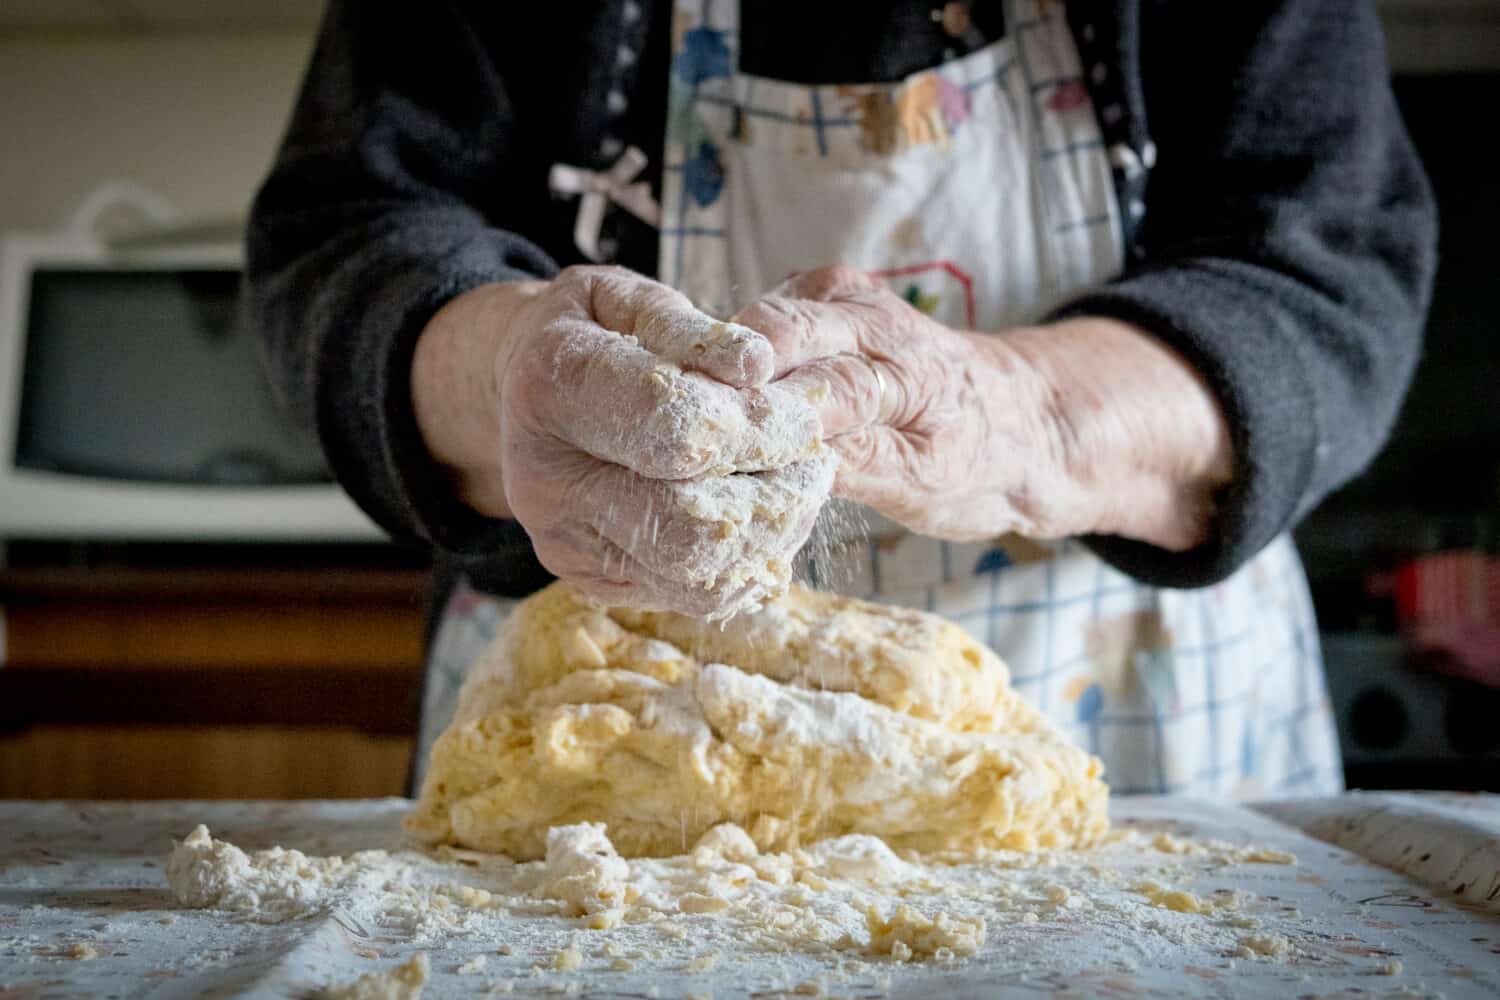 grandma making pasta the old traditional way in her home